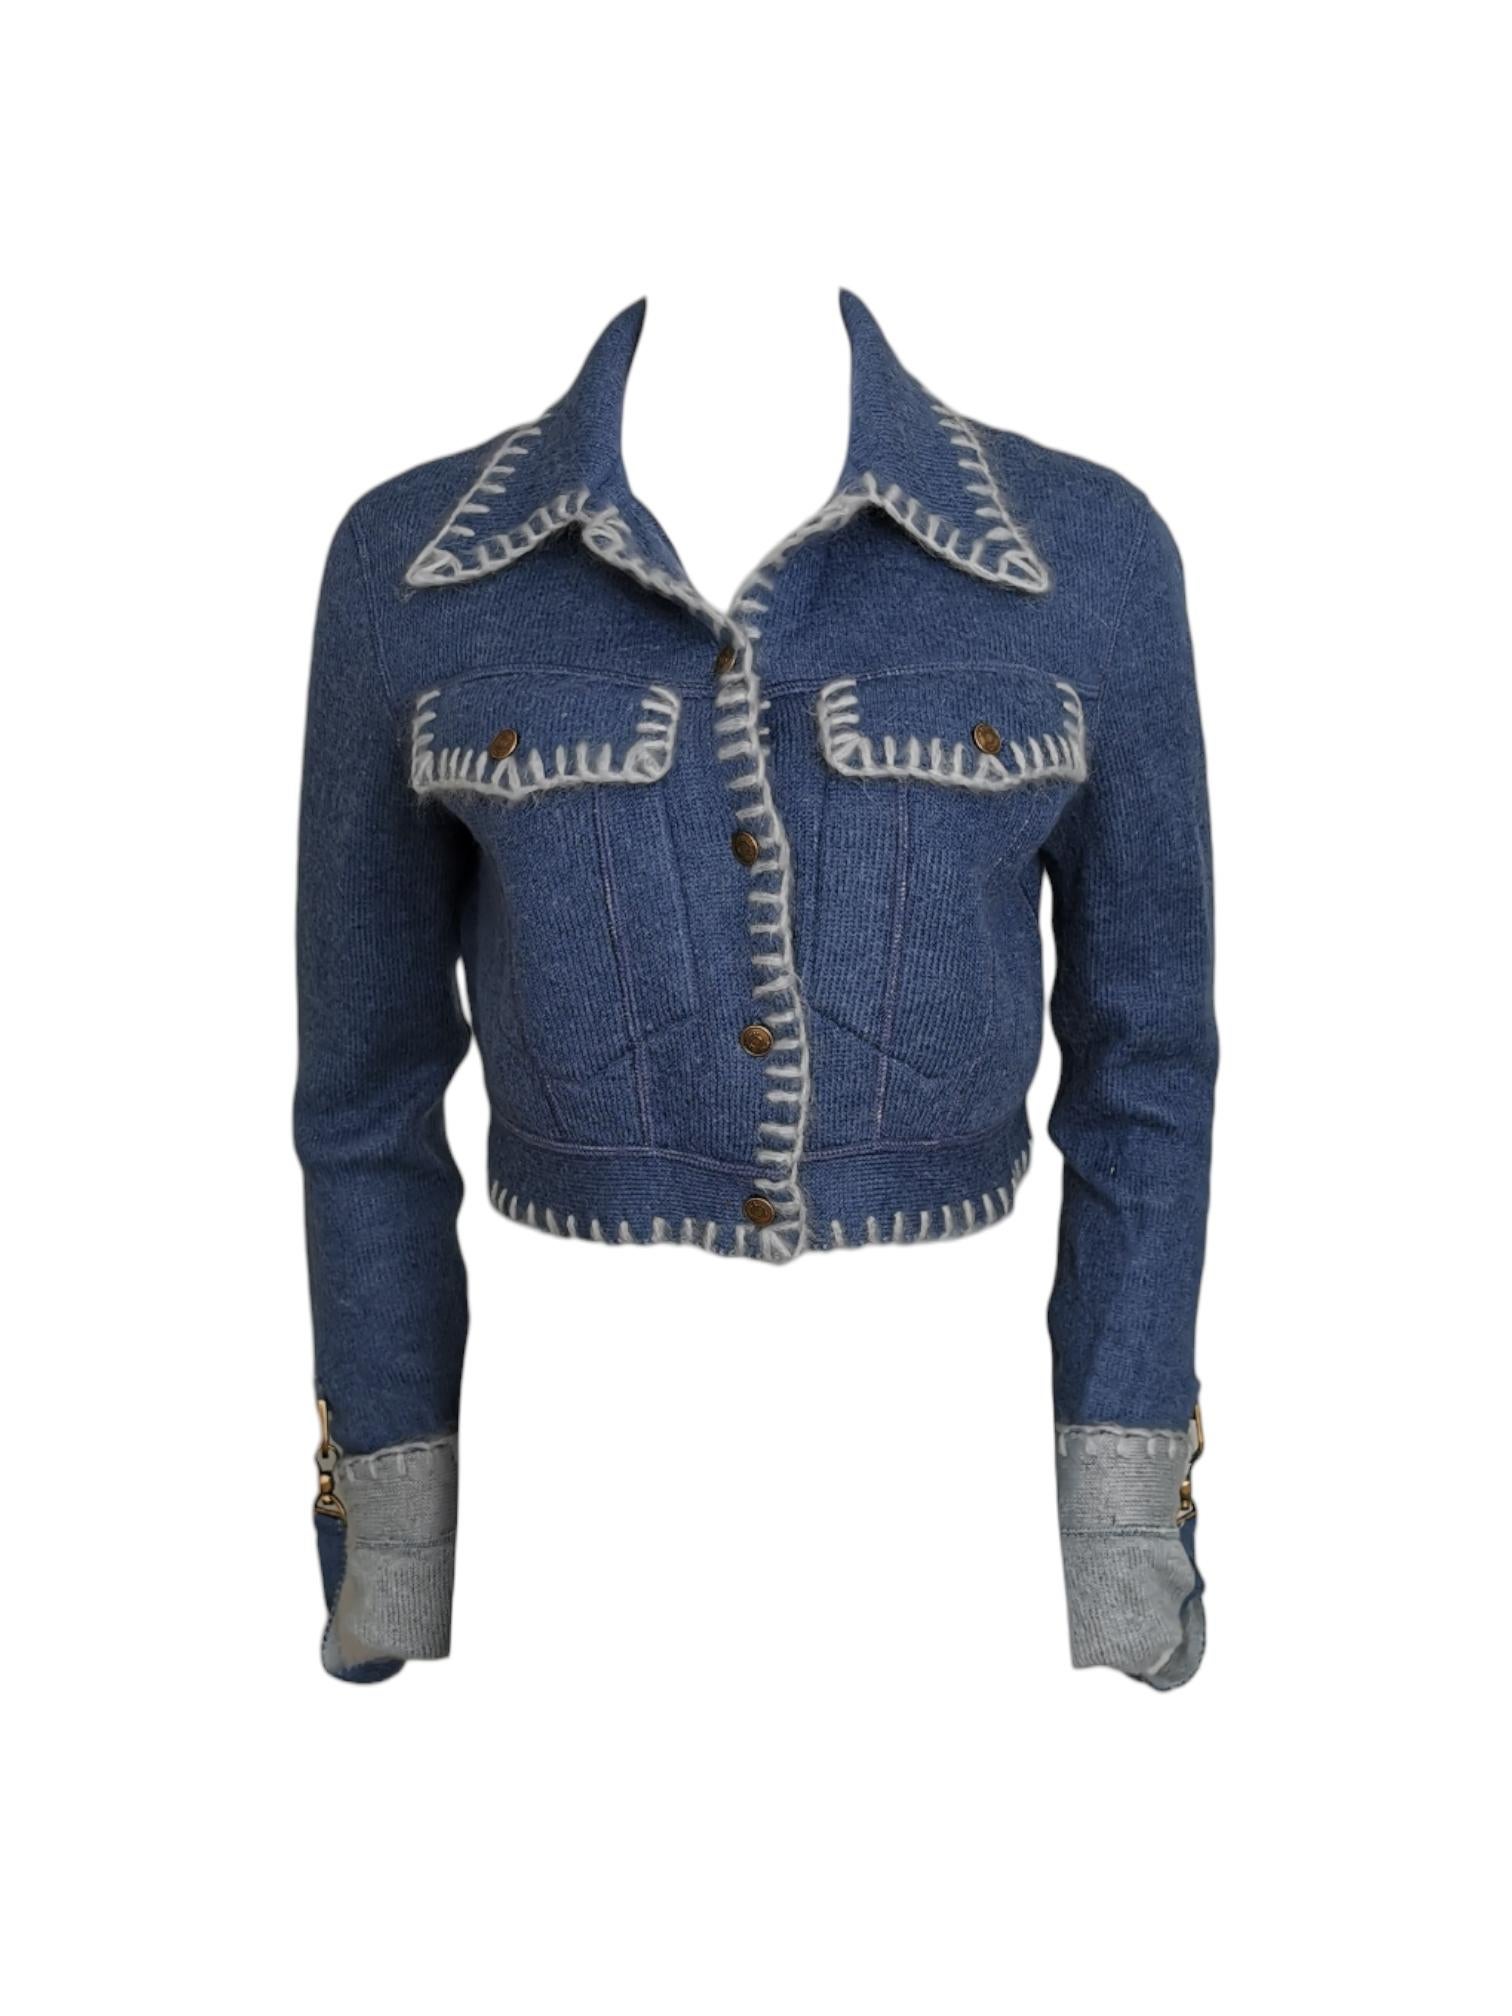 “Welcome to all our Super Fly Girls” (Vogue, 2000). The 2000’s collections are known for their saddle details. This jacket features the Saddle D’s around the cuffs and beautiful light stitches all around. The knitted jacket gives off a very casual